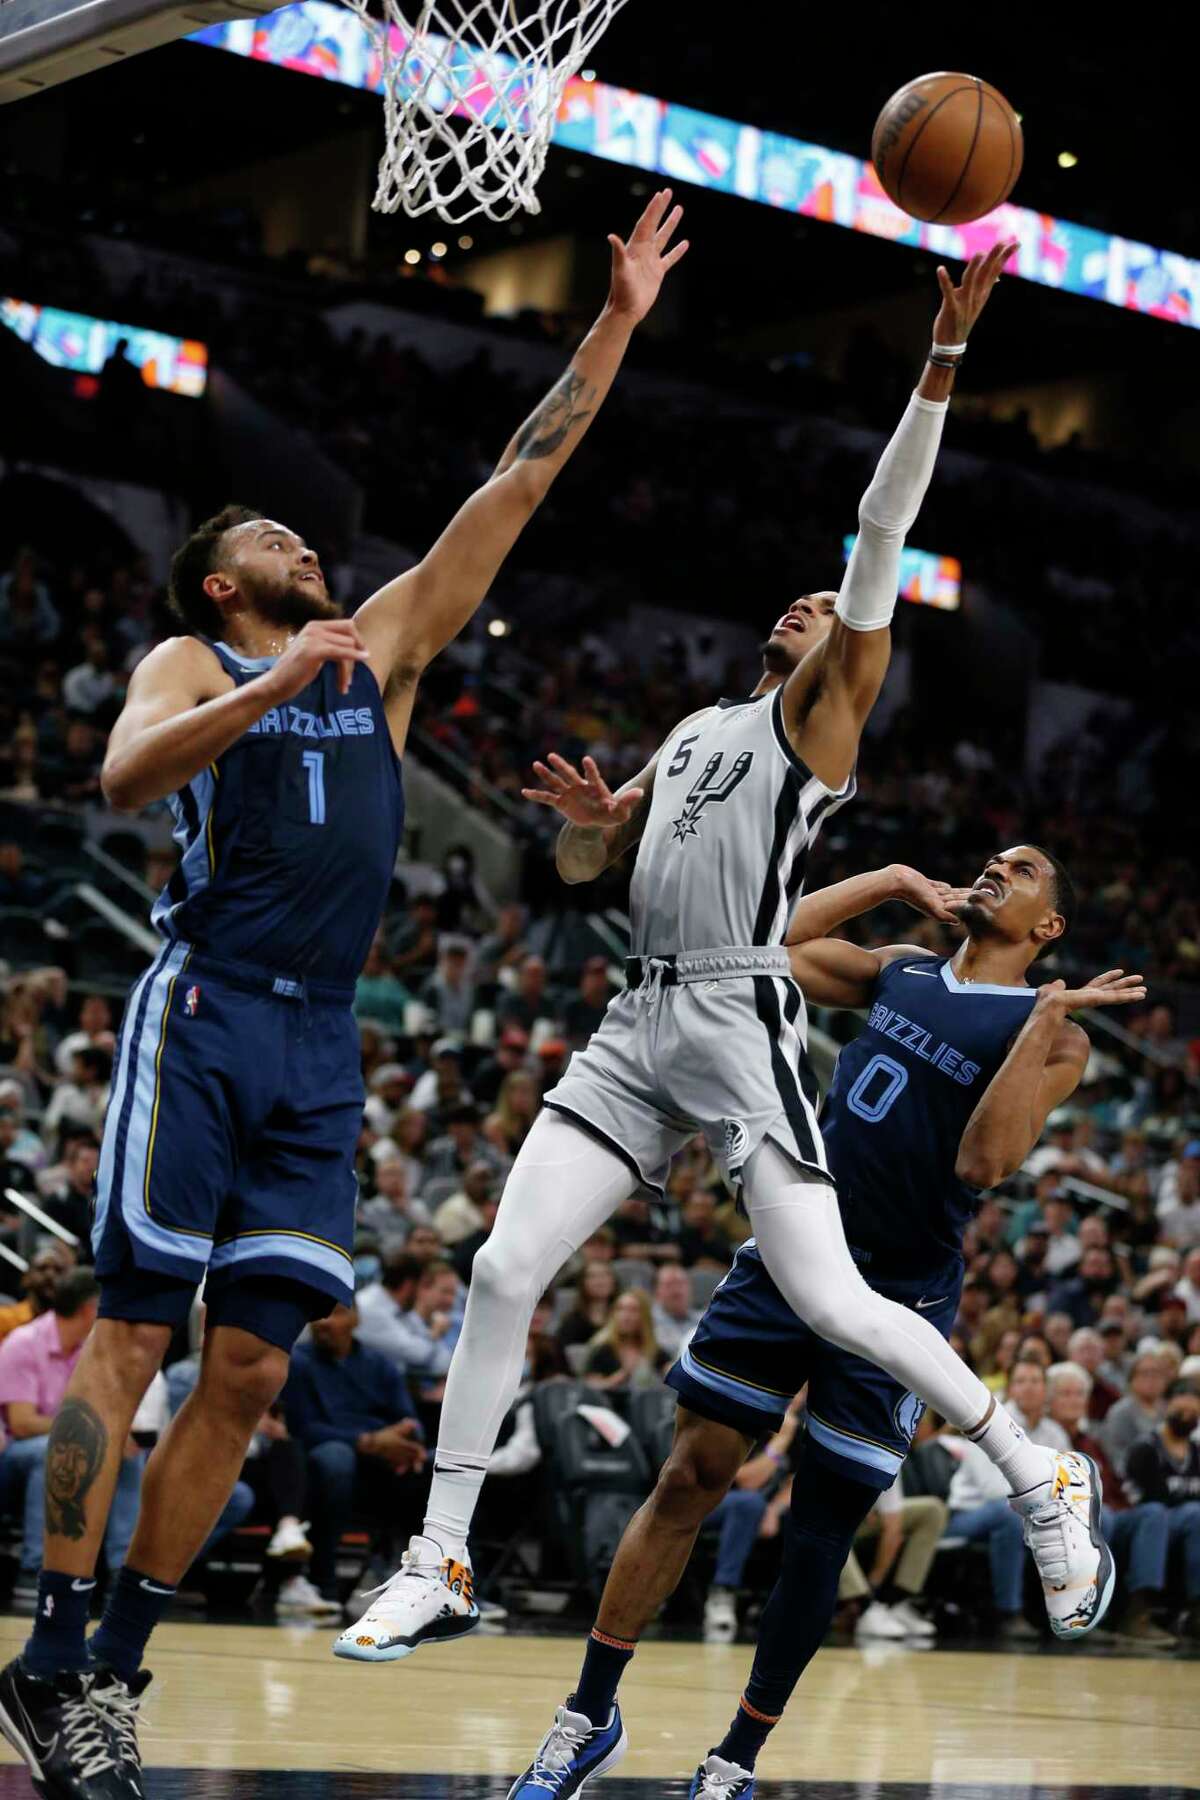 San Antonio Spurs guard Dejounte Murray (5) drives on Memphis Grizzlies Kyle Anderson (1) in second quarter. San Antonio Spurs v Memphis Grizzlies on Wednesday, March 30, 2022 at the AT&T Center.